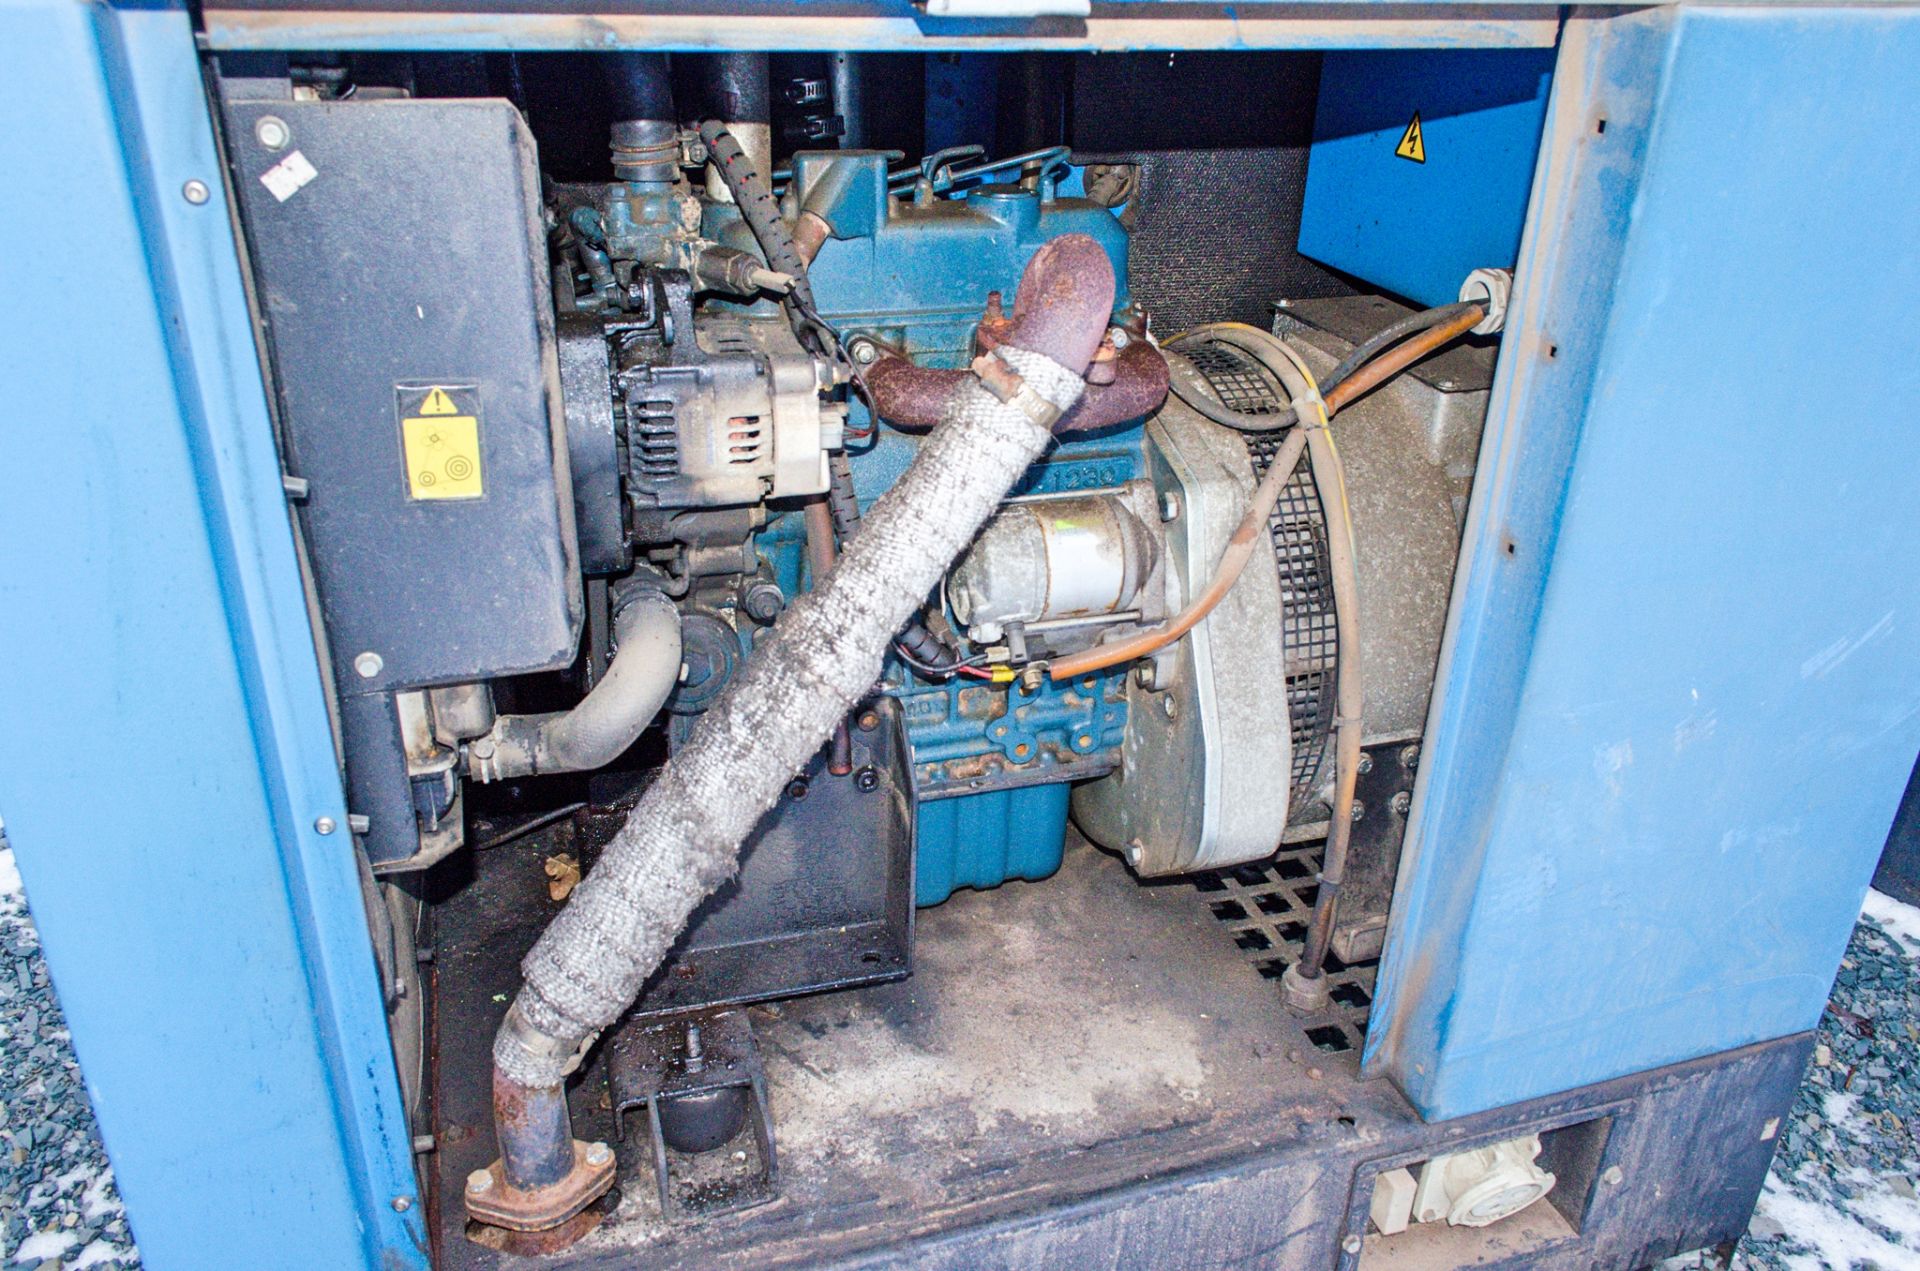 Genset MGMK 10000 10 kva static diesel driven generator Recorded Hours: 3954 MS2814 - Image 3 of 5